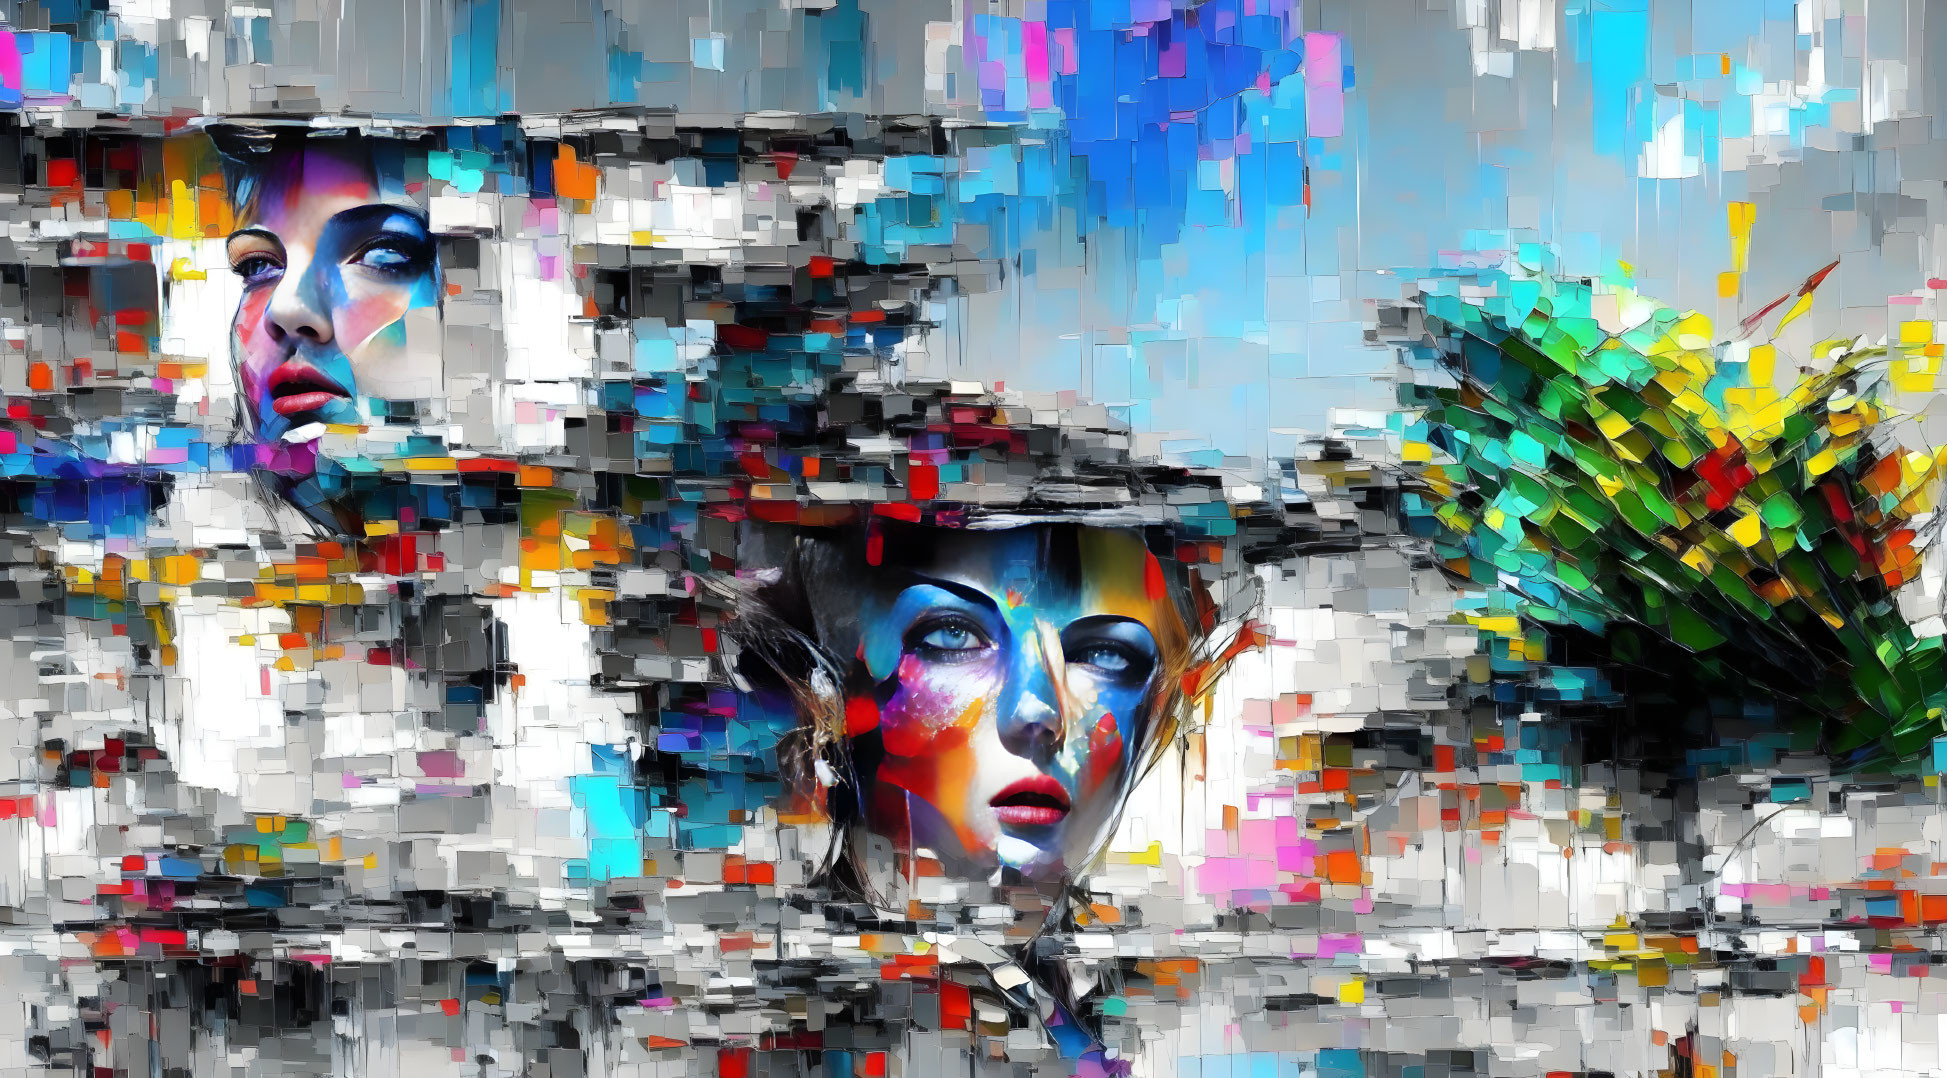 Vibrant multicolored brushstrokes on grayscale background depicting two female faces